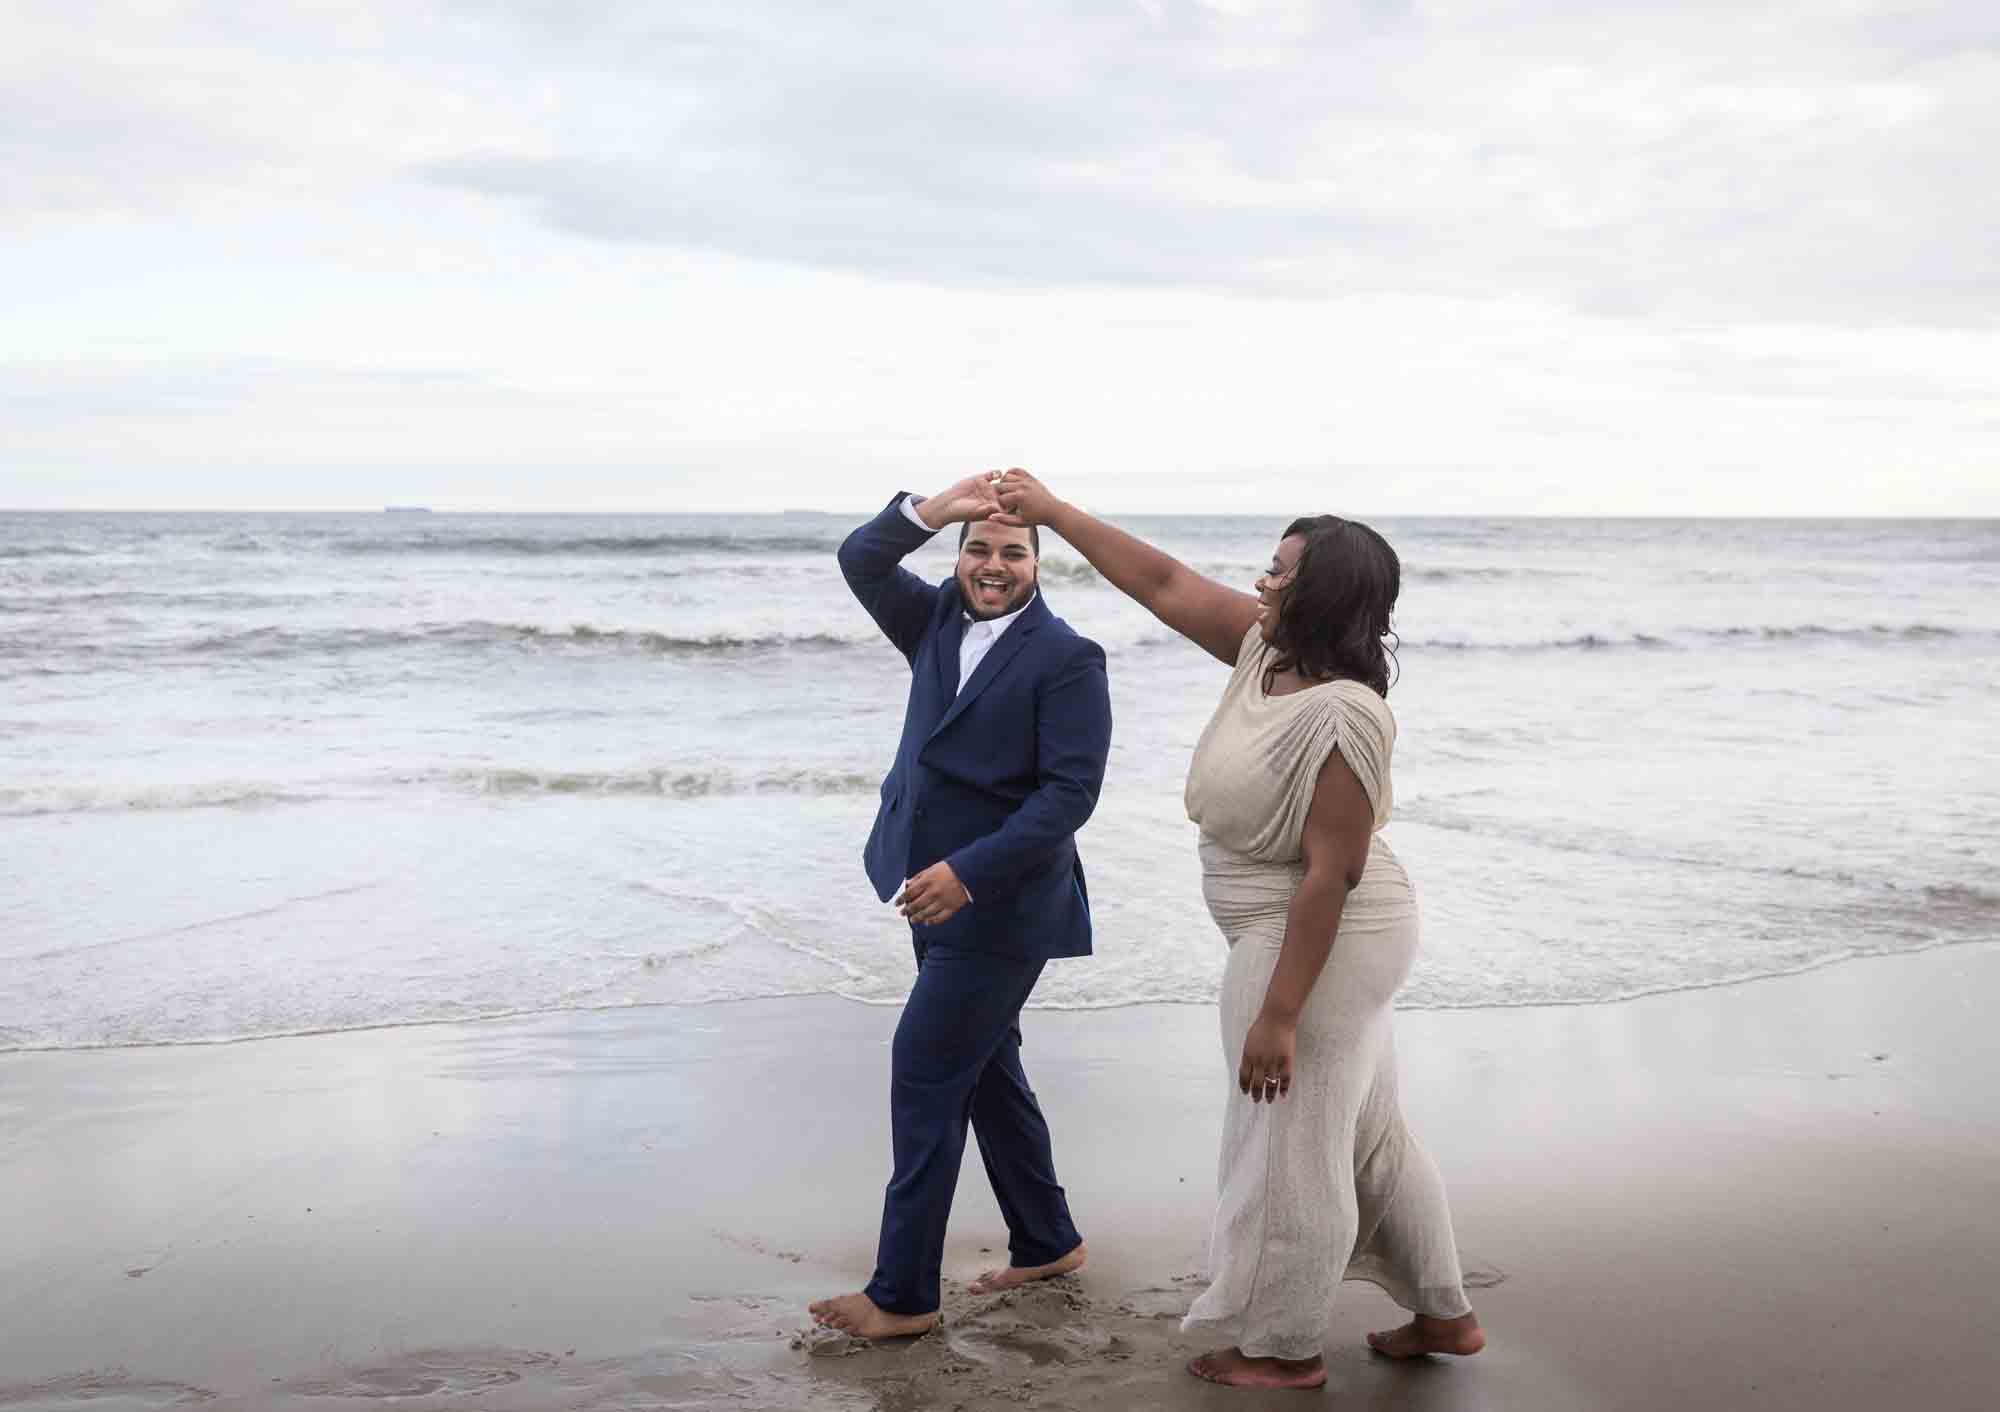 Couple dancing in front of waves for an article on how to plan the perfect beach engagement photo shoot